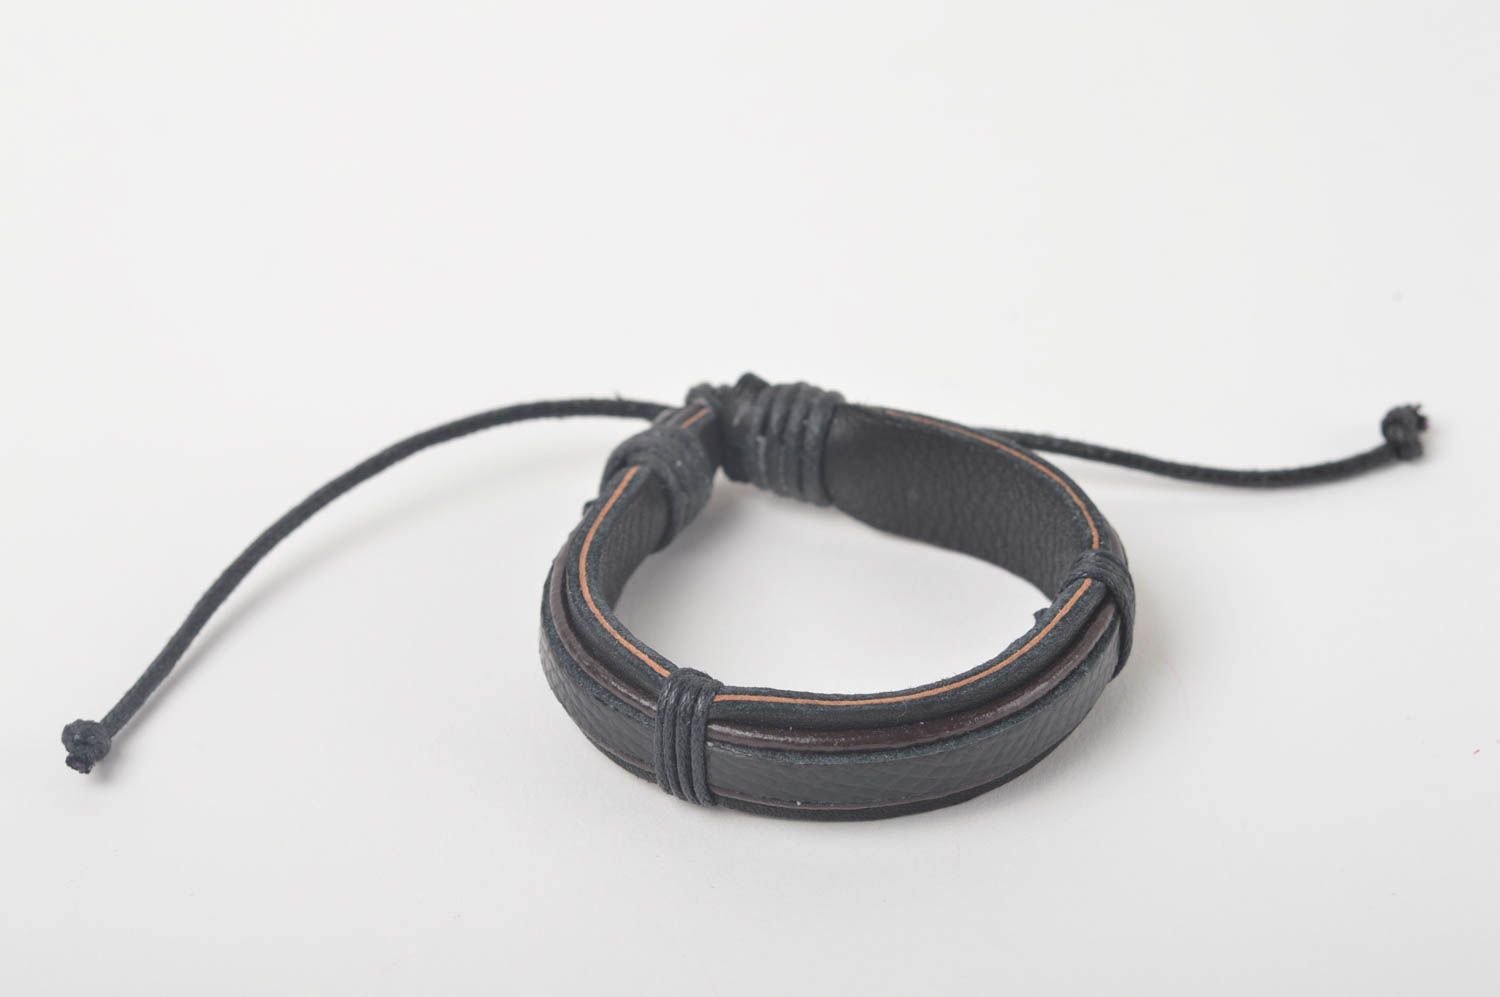 Unusual handmade leather bracelet designs fashion accessories gifts for her photo 2